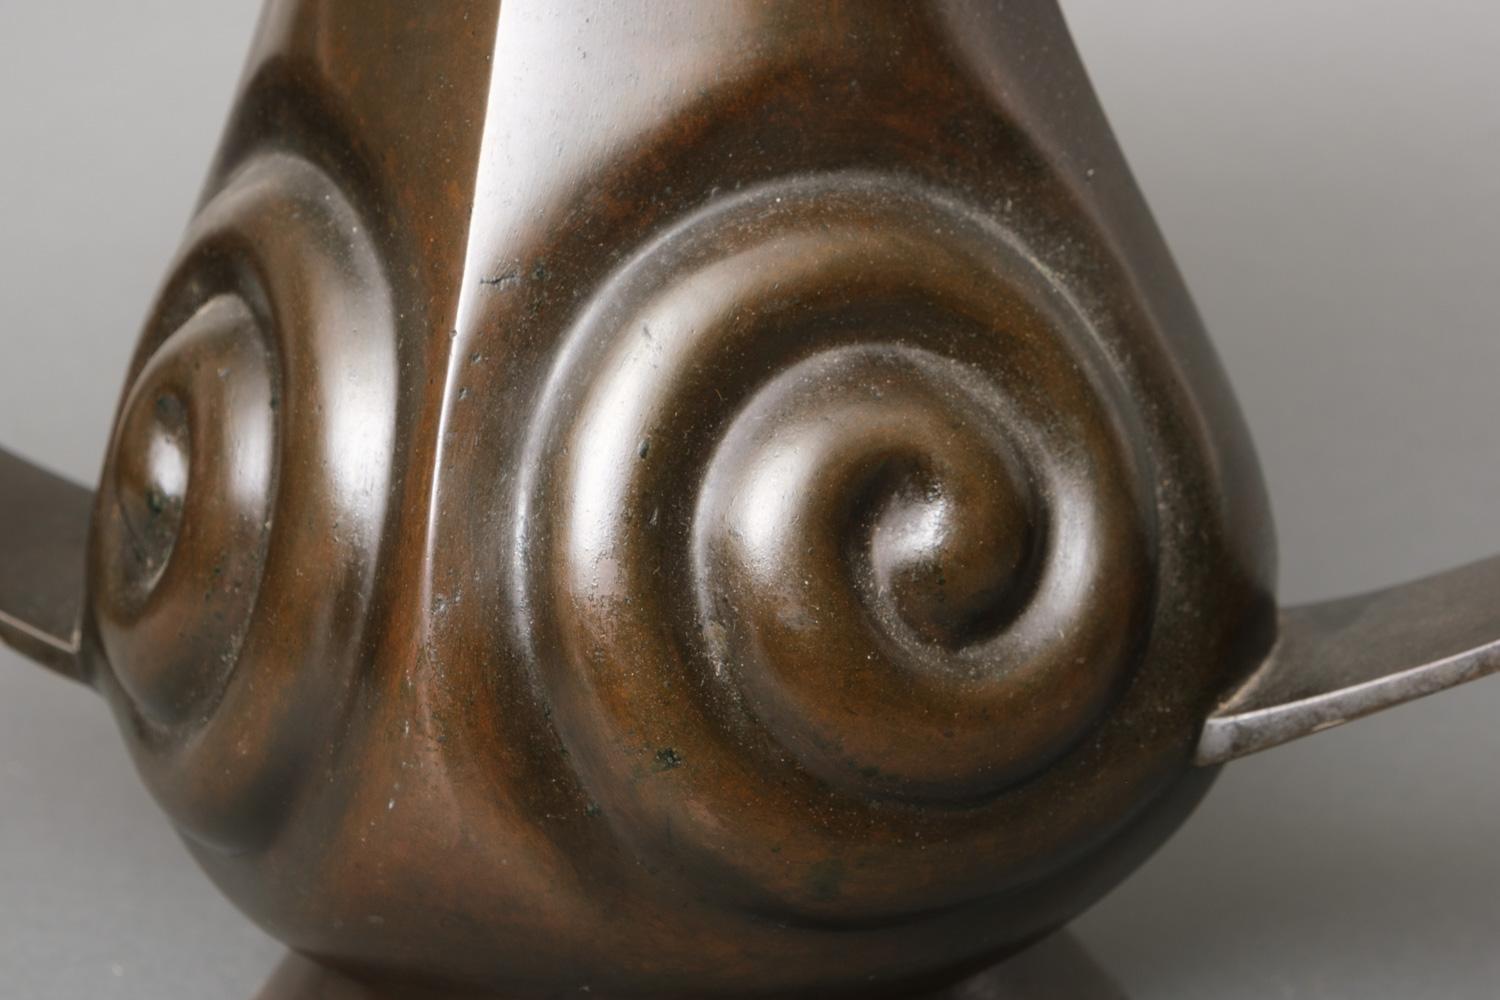 Fantastically shaped large Japanese bronze mimikuchi (ear-mouth) flying handle vase. The vase has two large flat handles smoothly running into the mouth, its body has four sides and each side is decorated with a spiral in relief. With very nice